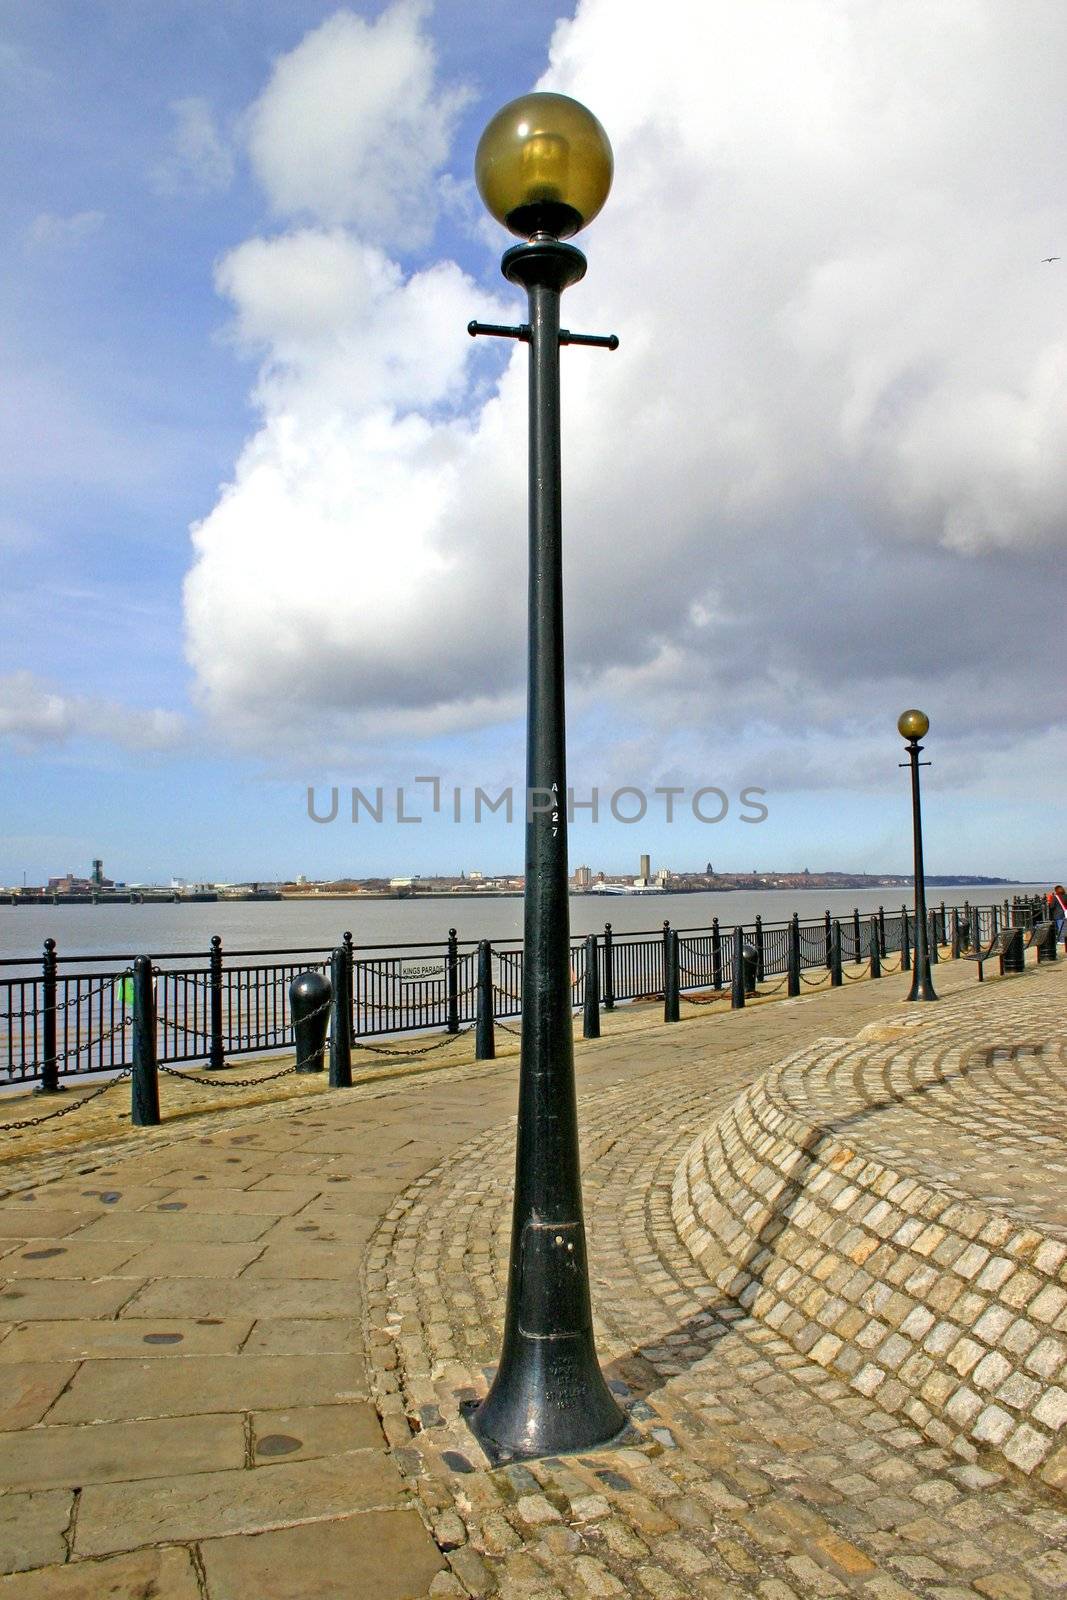 Old Lamp Post On Liverpool Waterfront